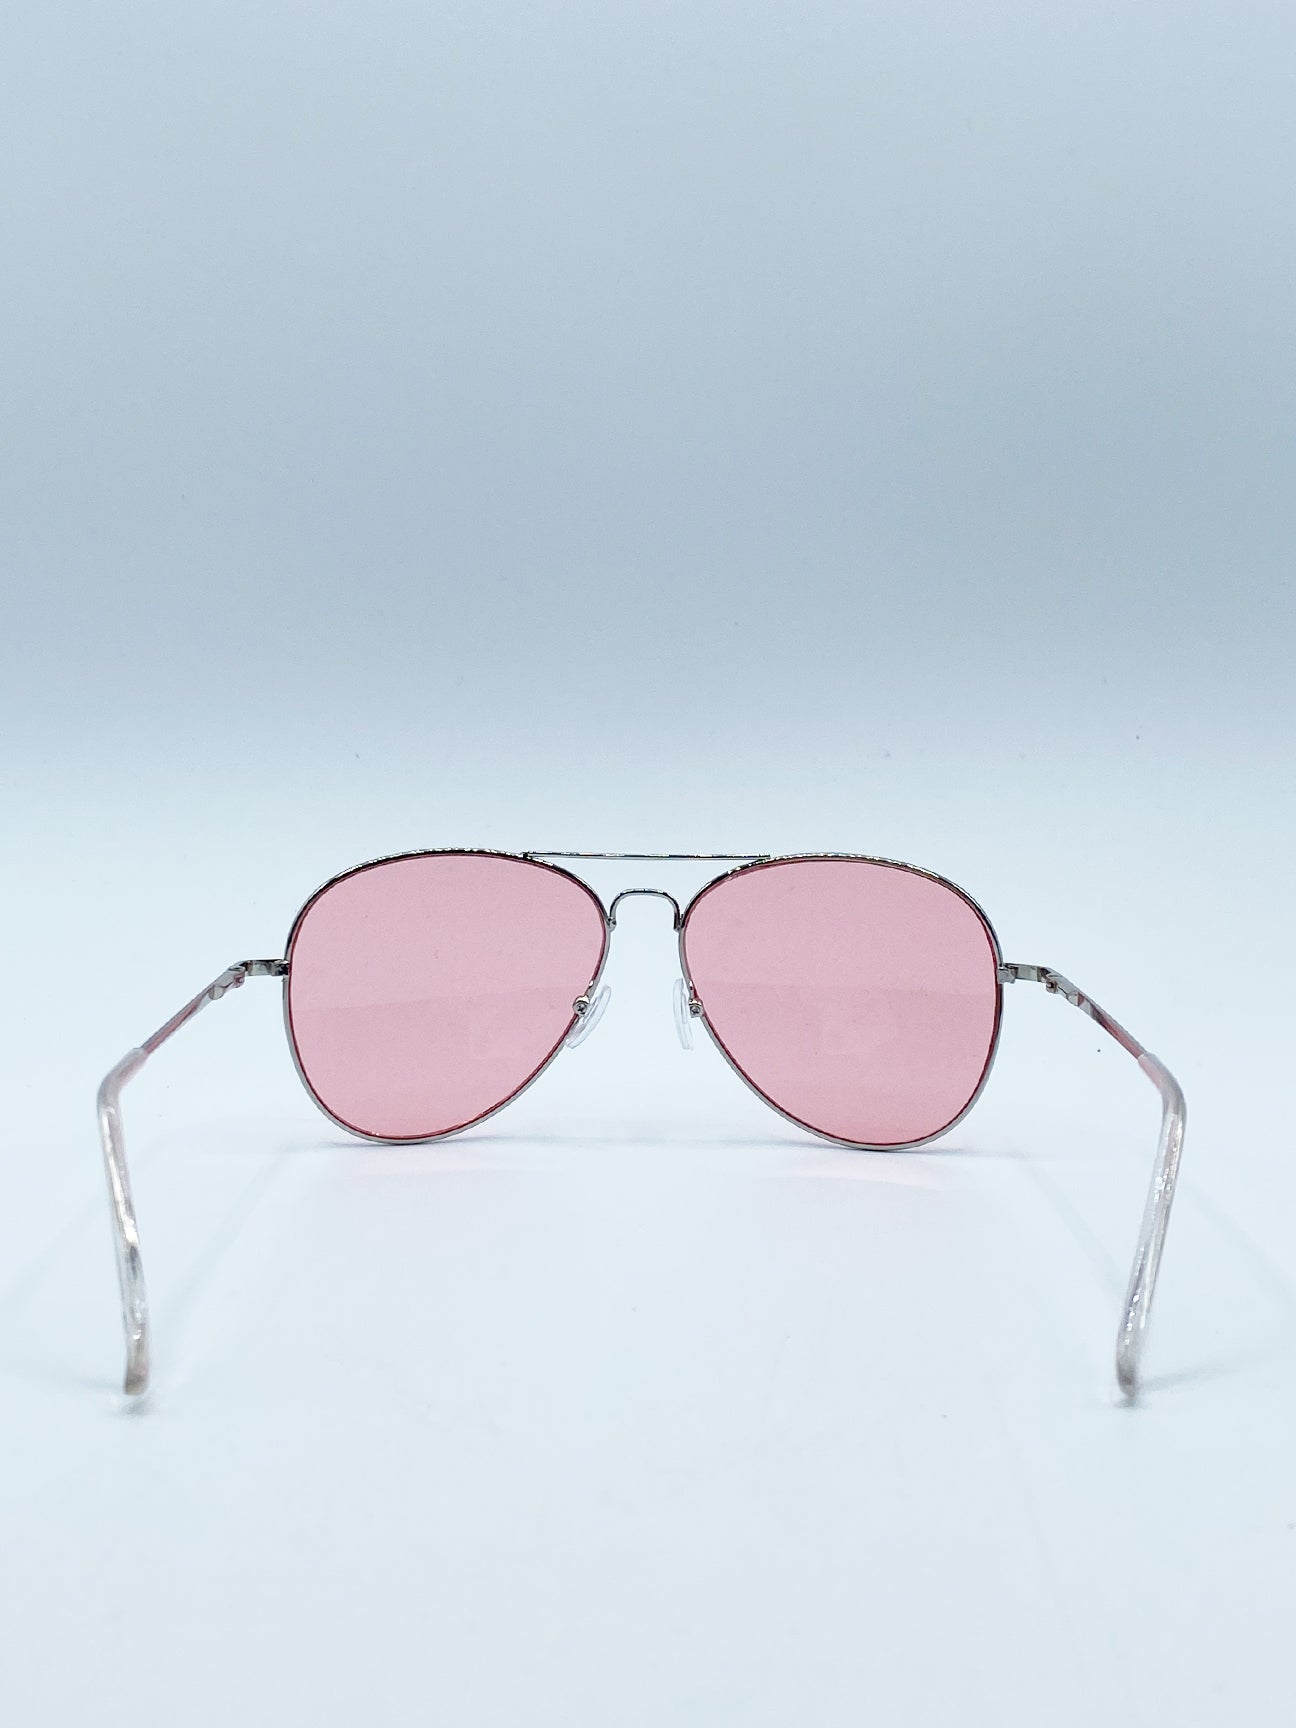 Silver Frame Aviators with Pink Lenses